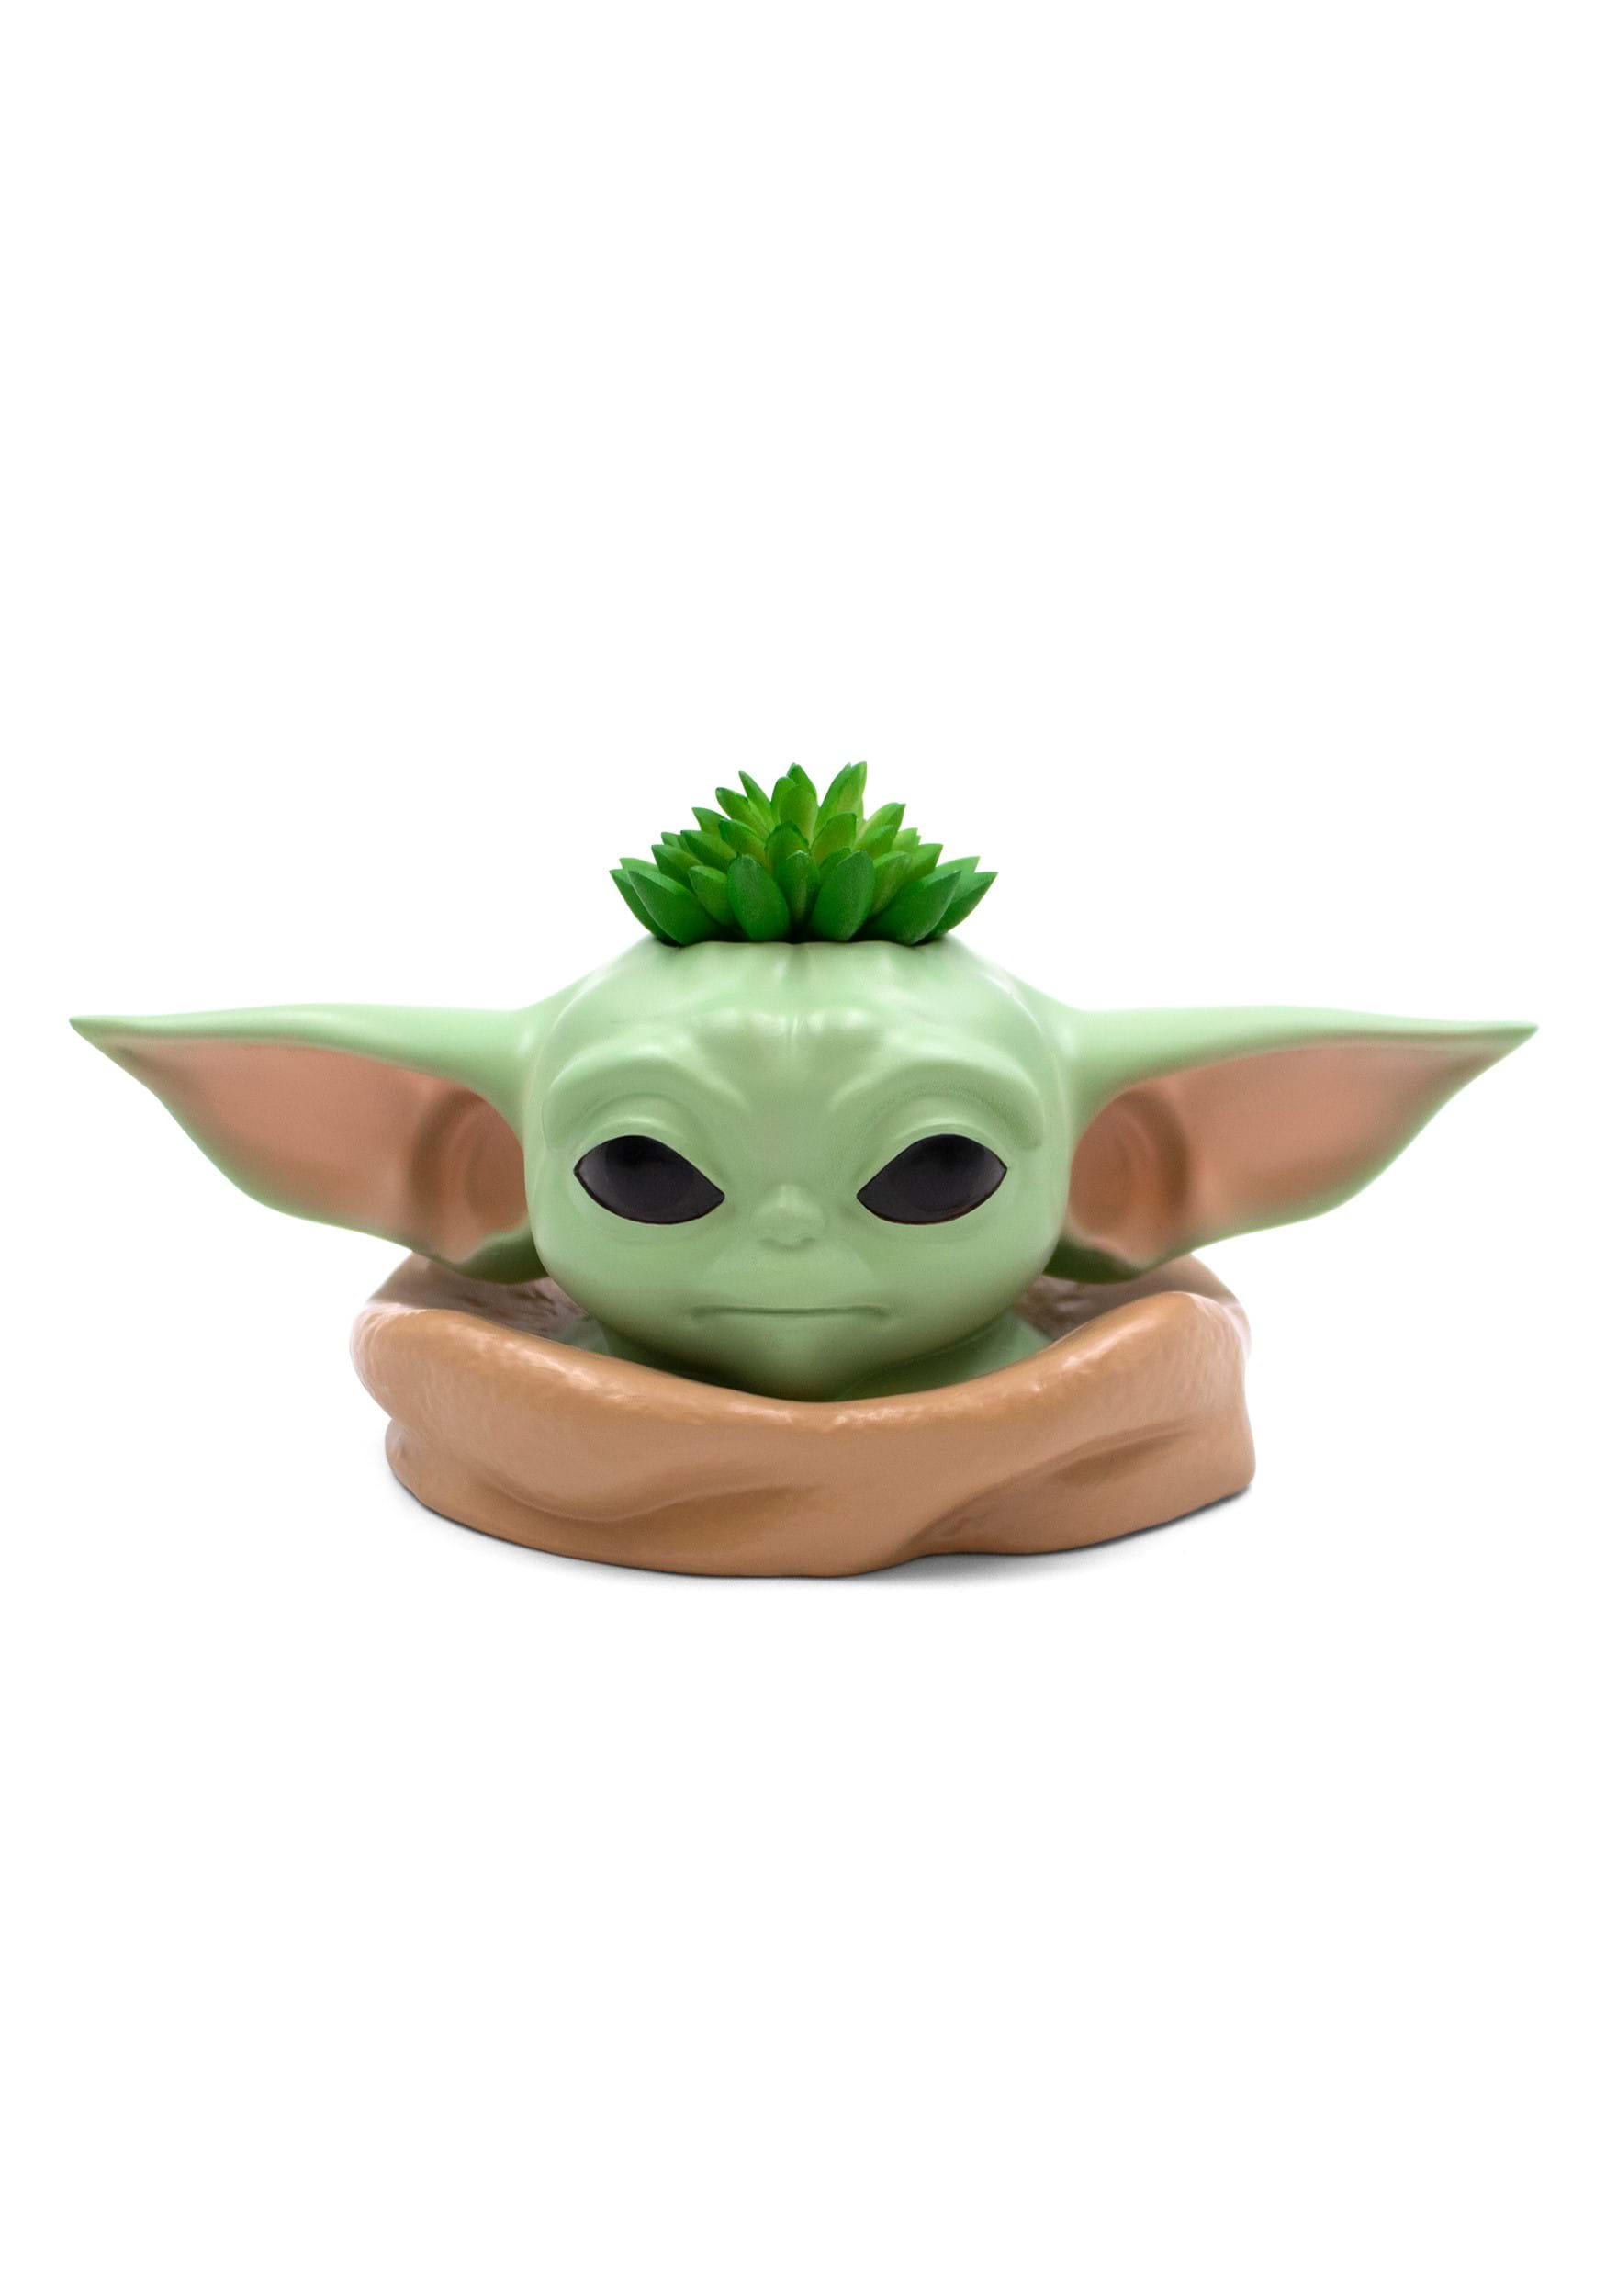 The Child from The Mandalorian Planter